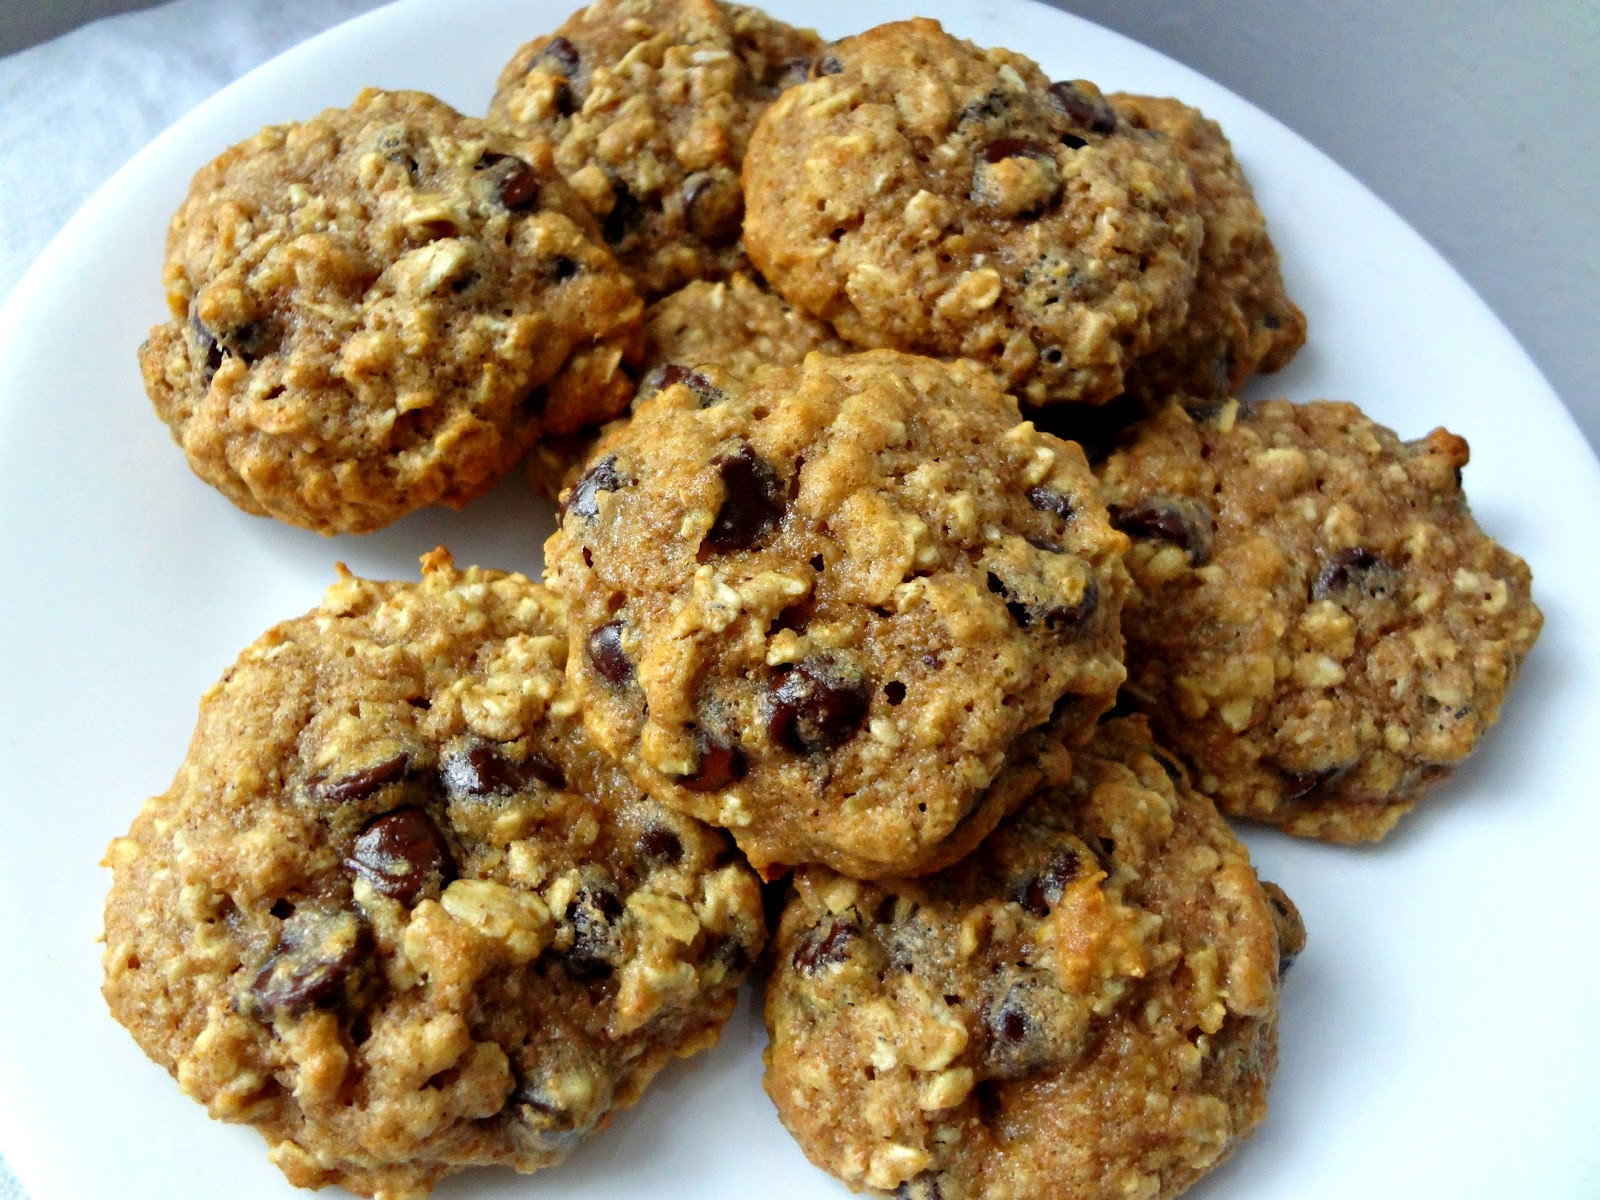 Chocolate Chip Oatmeal Cookies Healthy
 The Cooking Actress Healthy Oatmeal Chocolate Chip Cookies